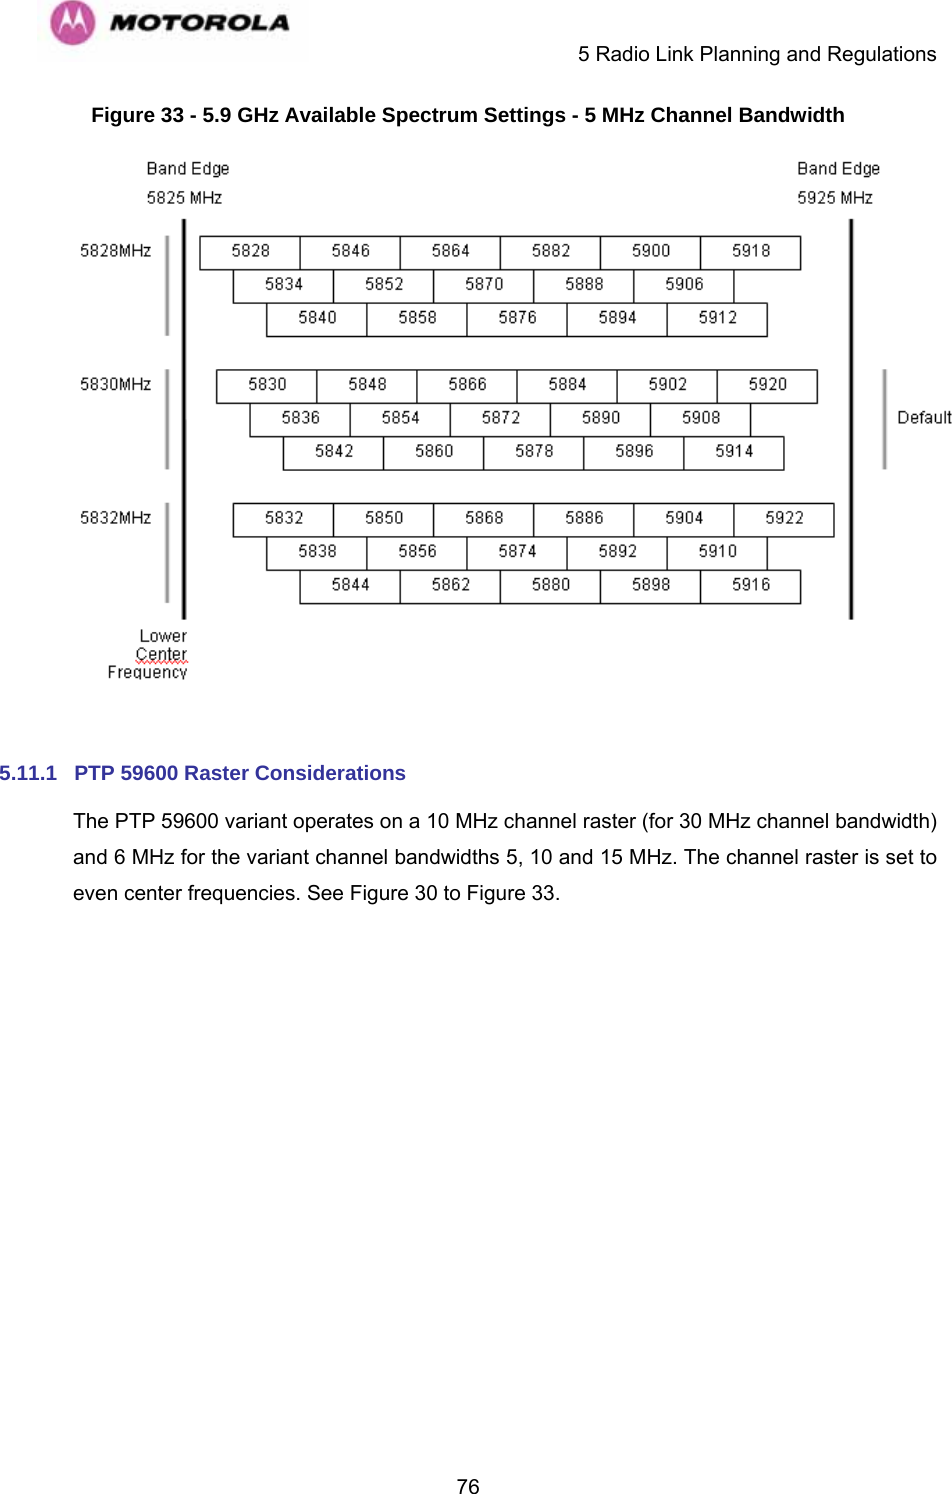     5 Radio Link Planning and Regulations  76Figure 33 - 5.9 GHz Available Spectrum Settings - 5 MHz Channel Bandwidth   5.11.1  PTP 59600 Raster Considerations The PTP 59600 variant operates on a 10 MHz channel raster (for 30 MHz channel bandwidth) and 6 MHz for the variant channel bandwidths 5, 10 and 15 MHz. The channel raster is set to even center frequencies. See Figure 30 to Figure 33. 